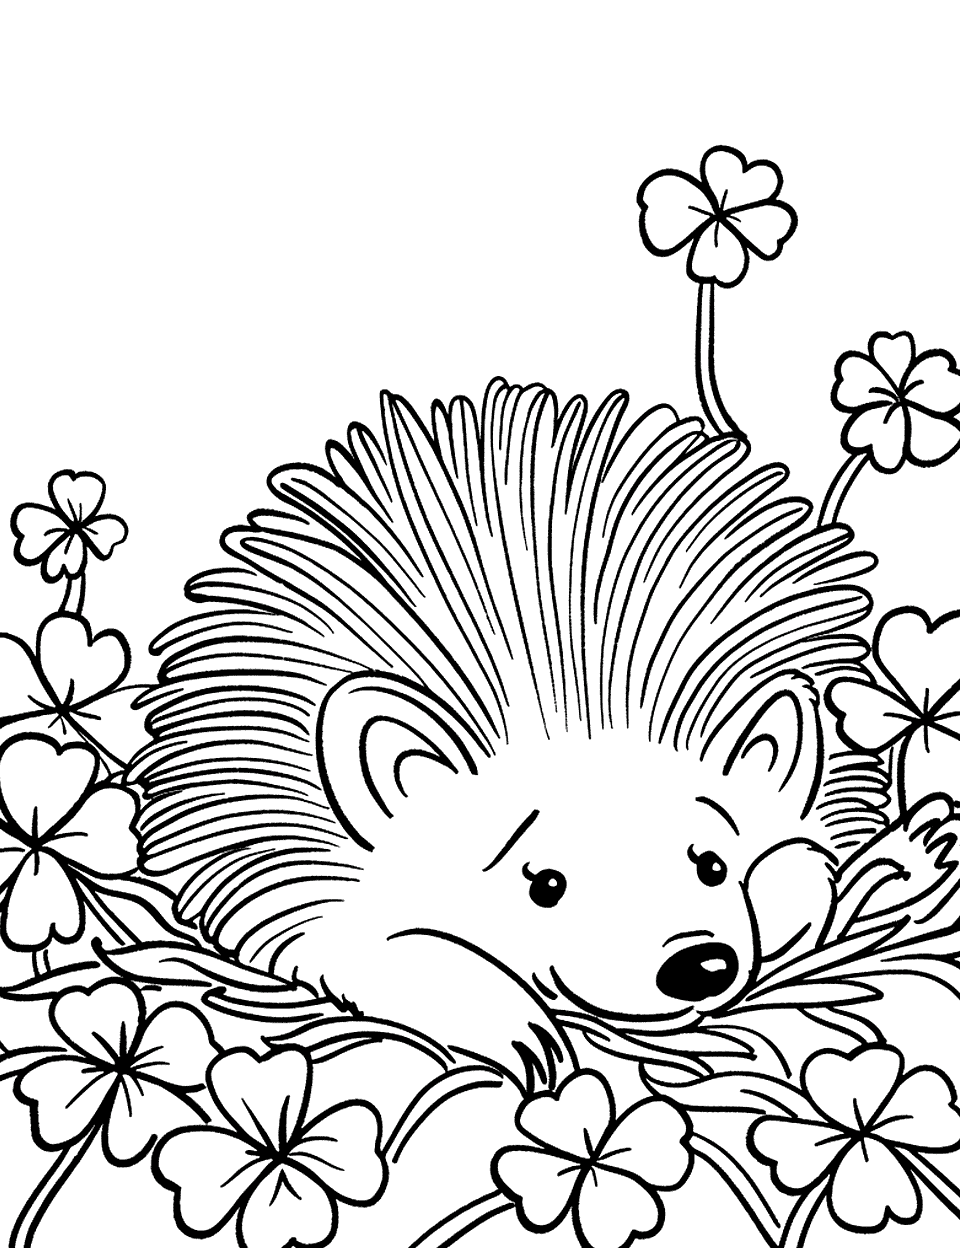 Hedgehog Rolling in Shamrocks Shamrock Coloring Page - A playful hedgehog rolling around and playing in a field of shamrocks.